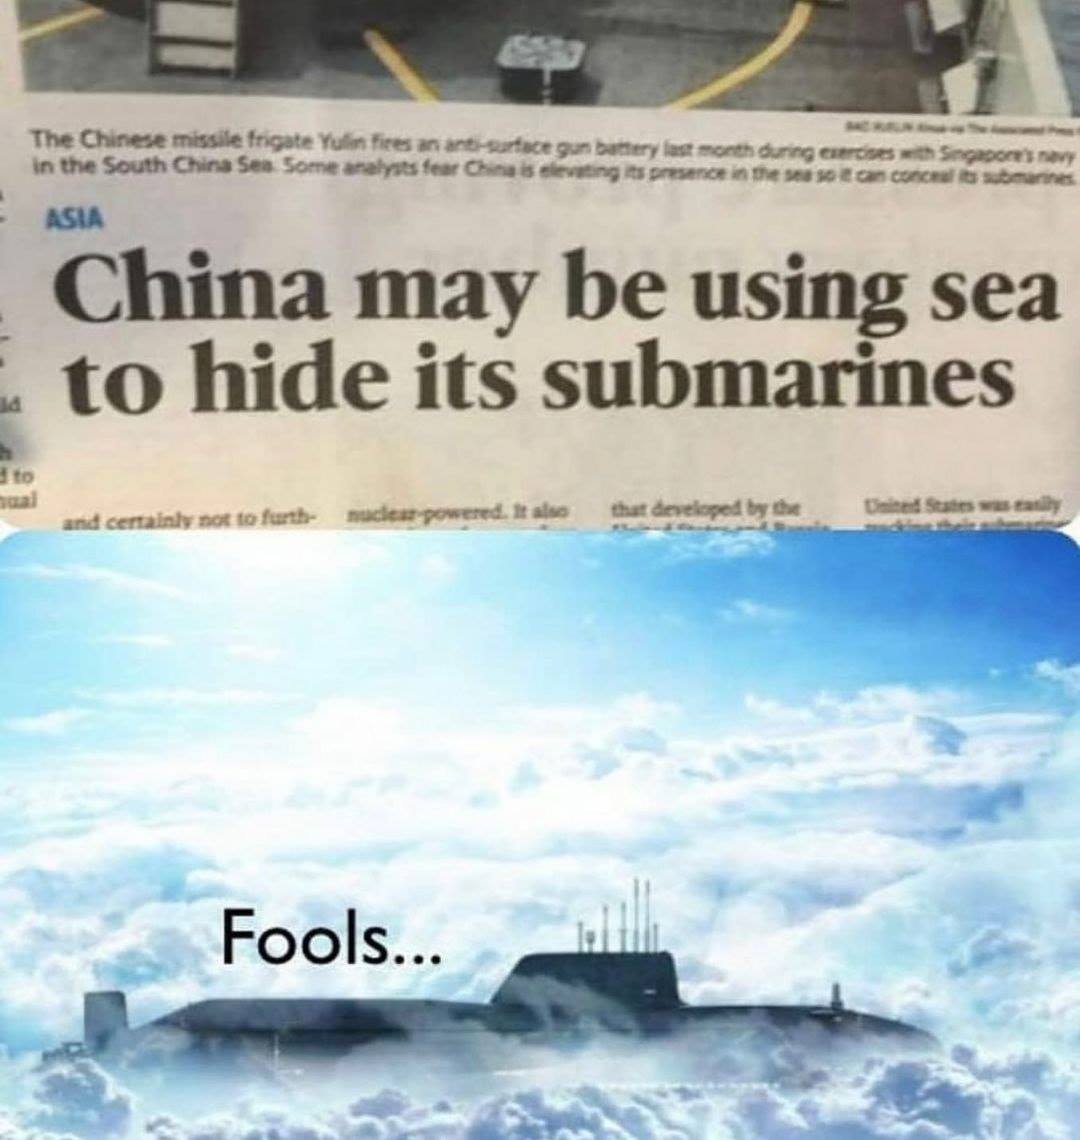 china uses sea to hide submarines - The Chinese missile frigate Yulin fires an antisortuce gan banery last month during curtos ngroom's nevy in the South China Sea Some analysts fear China is elevating its presence in the maso tan concreto obmannes Asia C